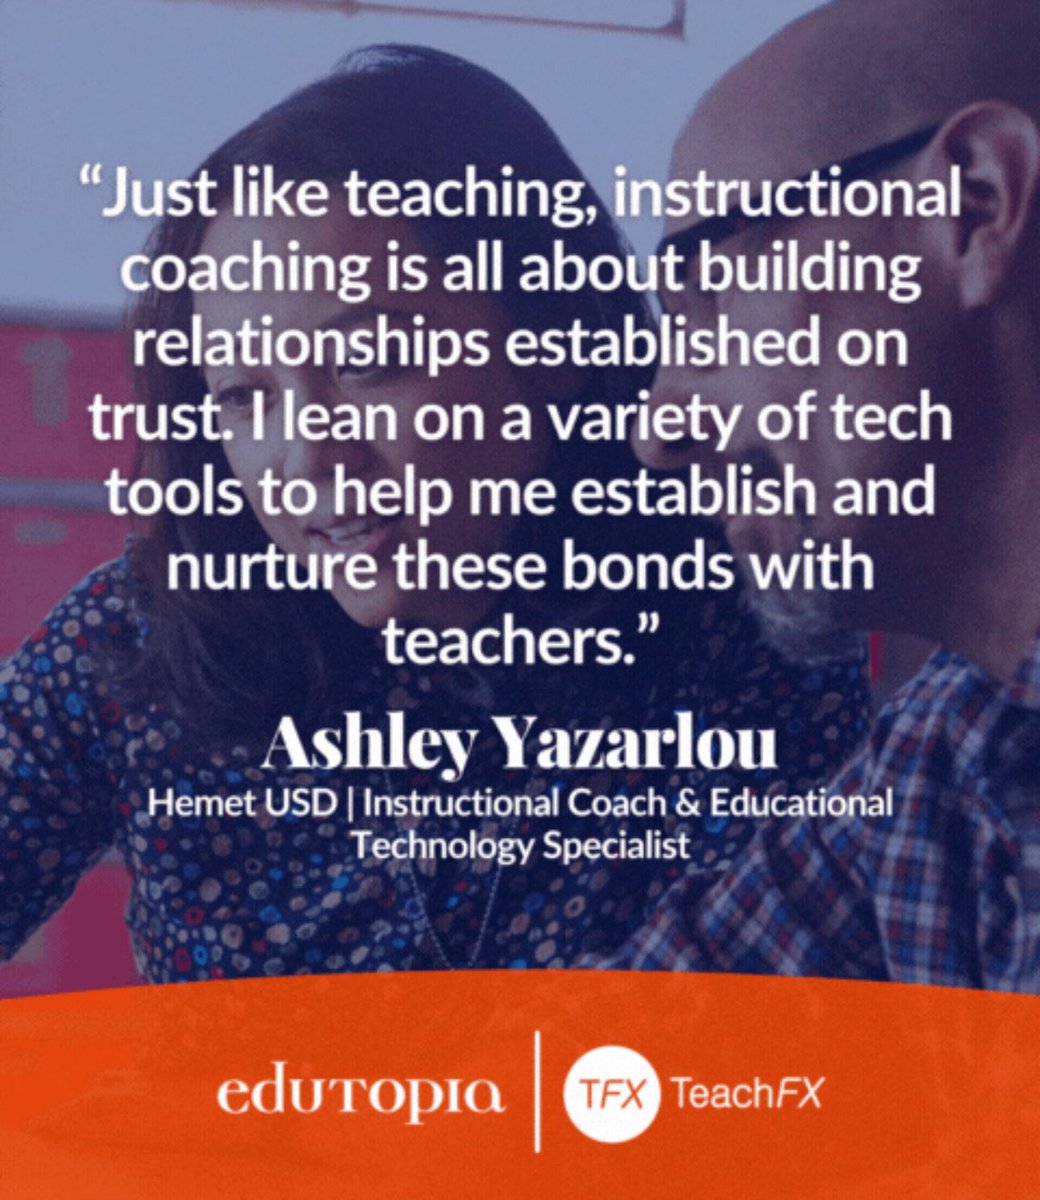 Whatever my new role is next year, I hope it includes #instructionalcoaching 🥹 For me, supporting new teachers & helping them build their capacity and confidence in the classroom has been such a rewarding part of my job. 😊

@edutopia @TeachFX 

hubs.li/Q02dqpCd0